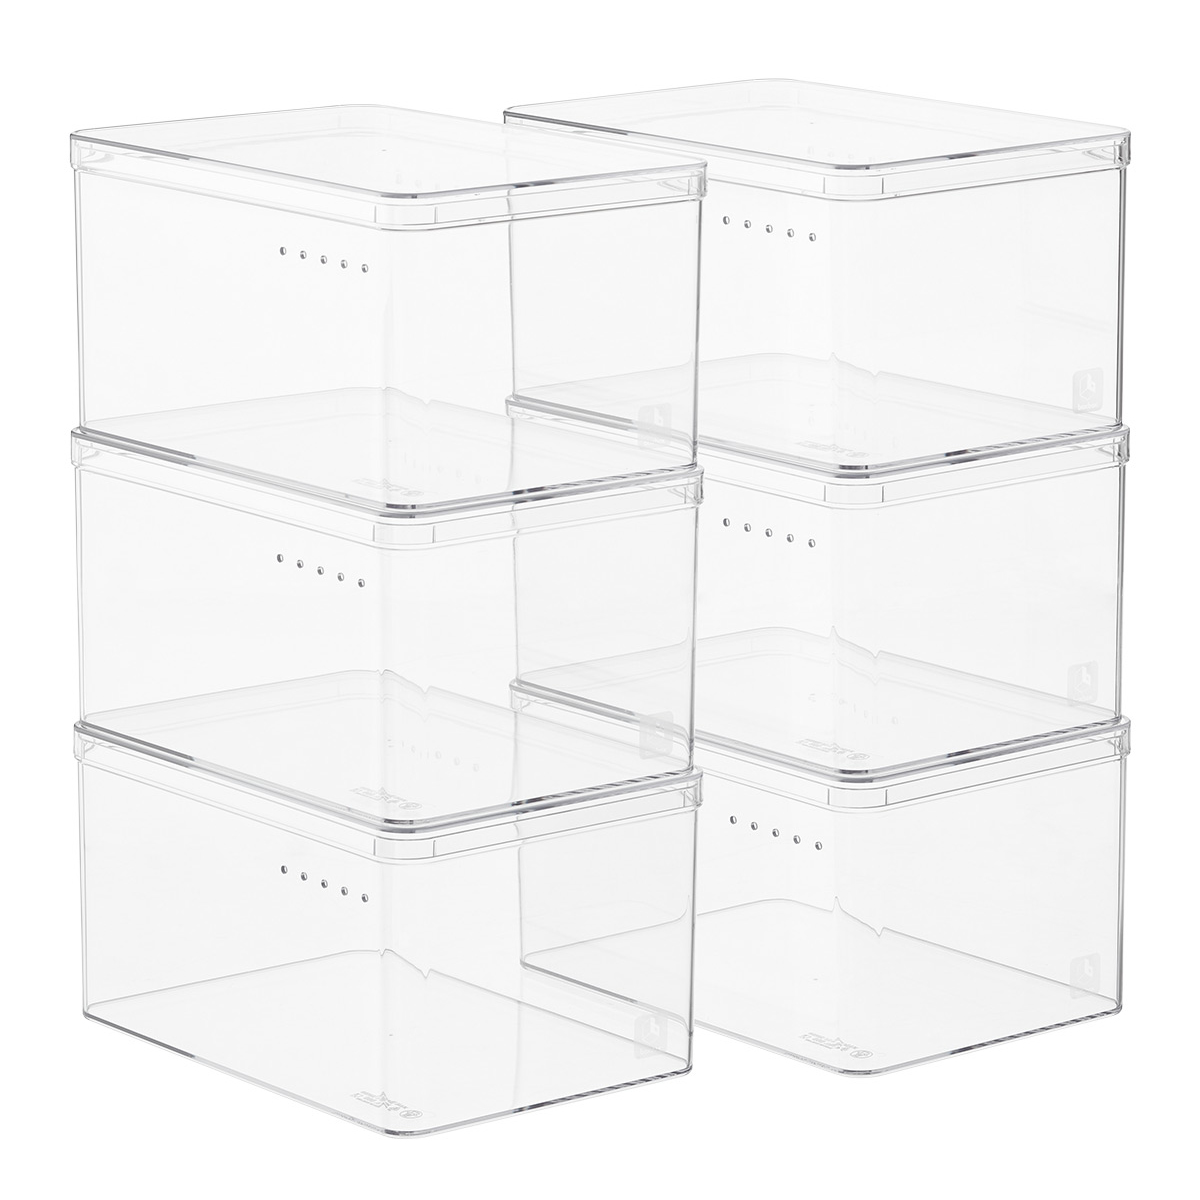 Heeled Shoe Boxes | The Container Store